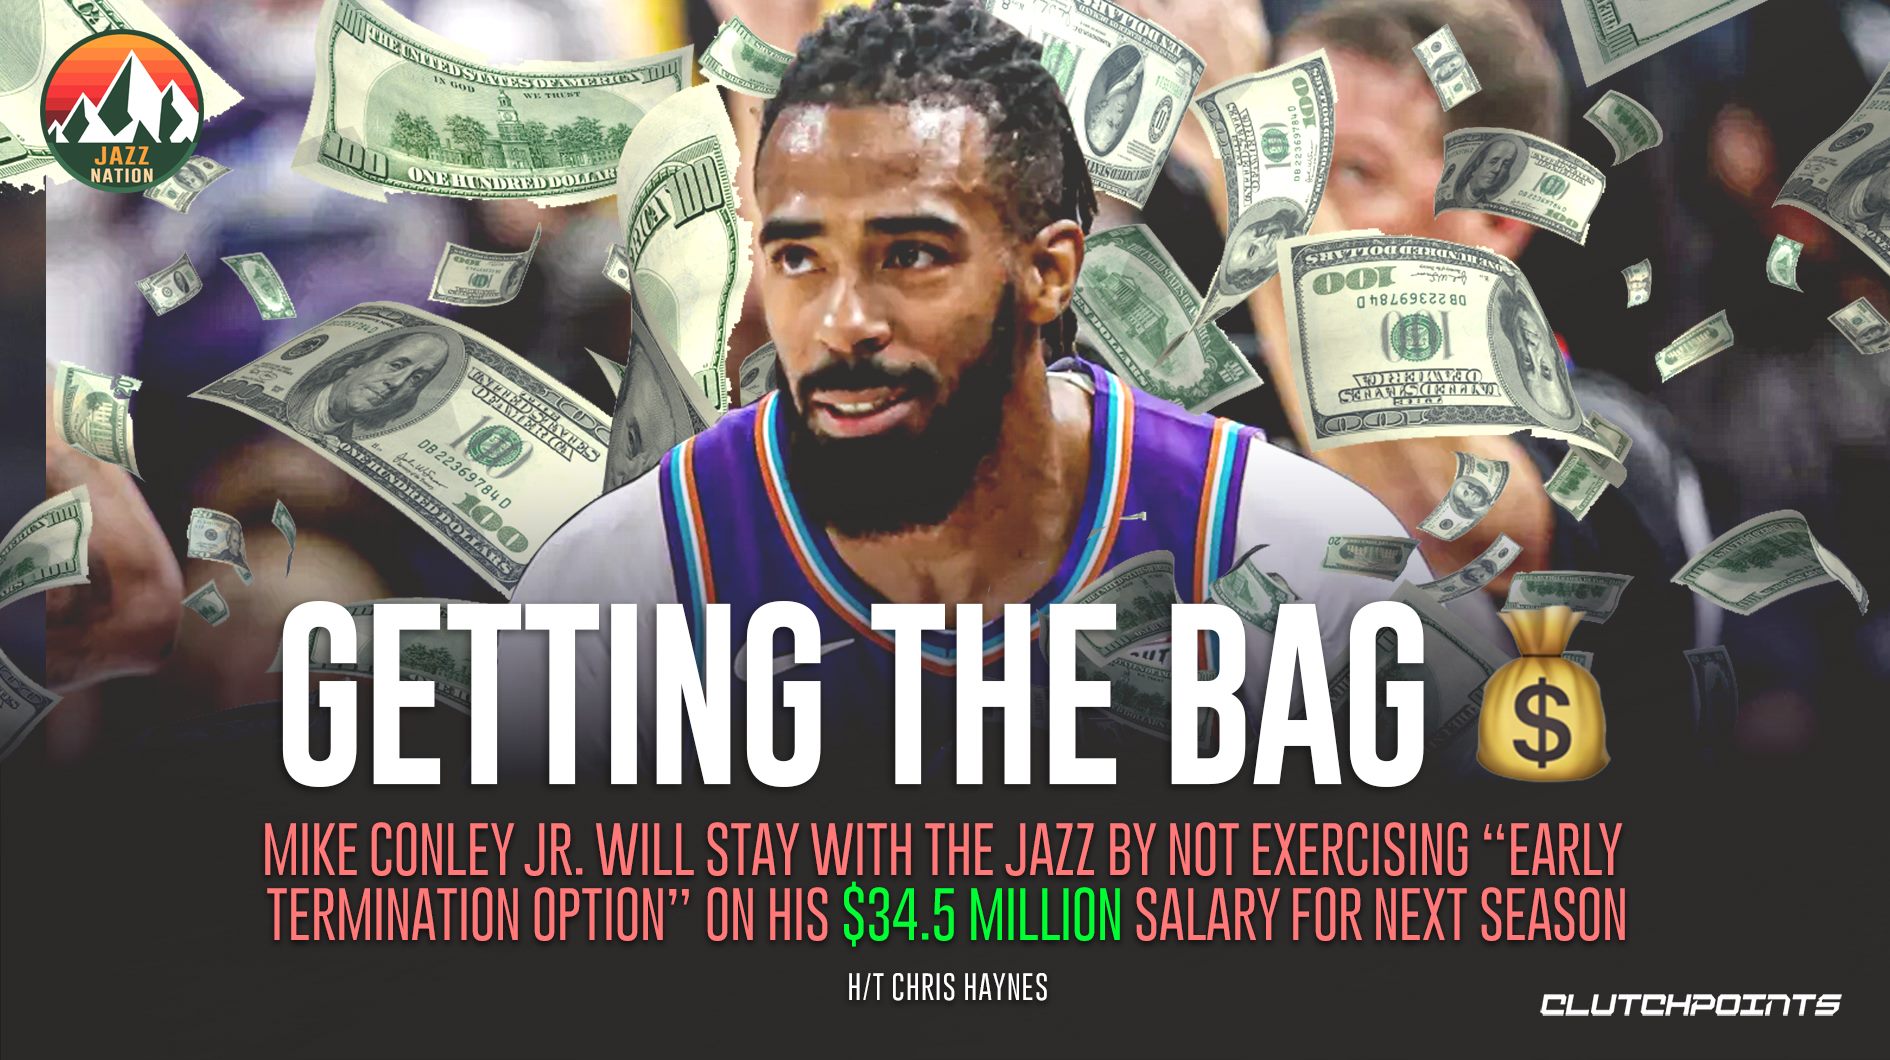 Jazz Nation on Twitter: "Mike Conley is here to stay, Jazz Nation ðâ¦ "